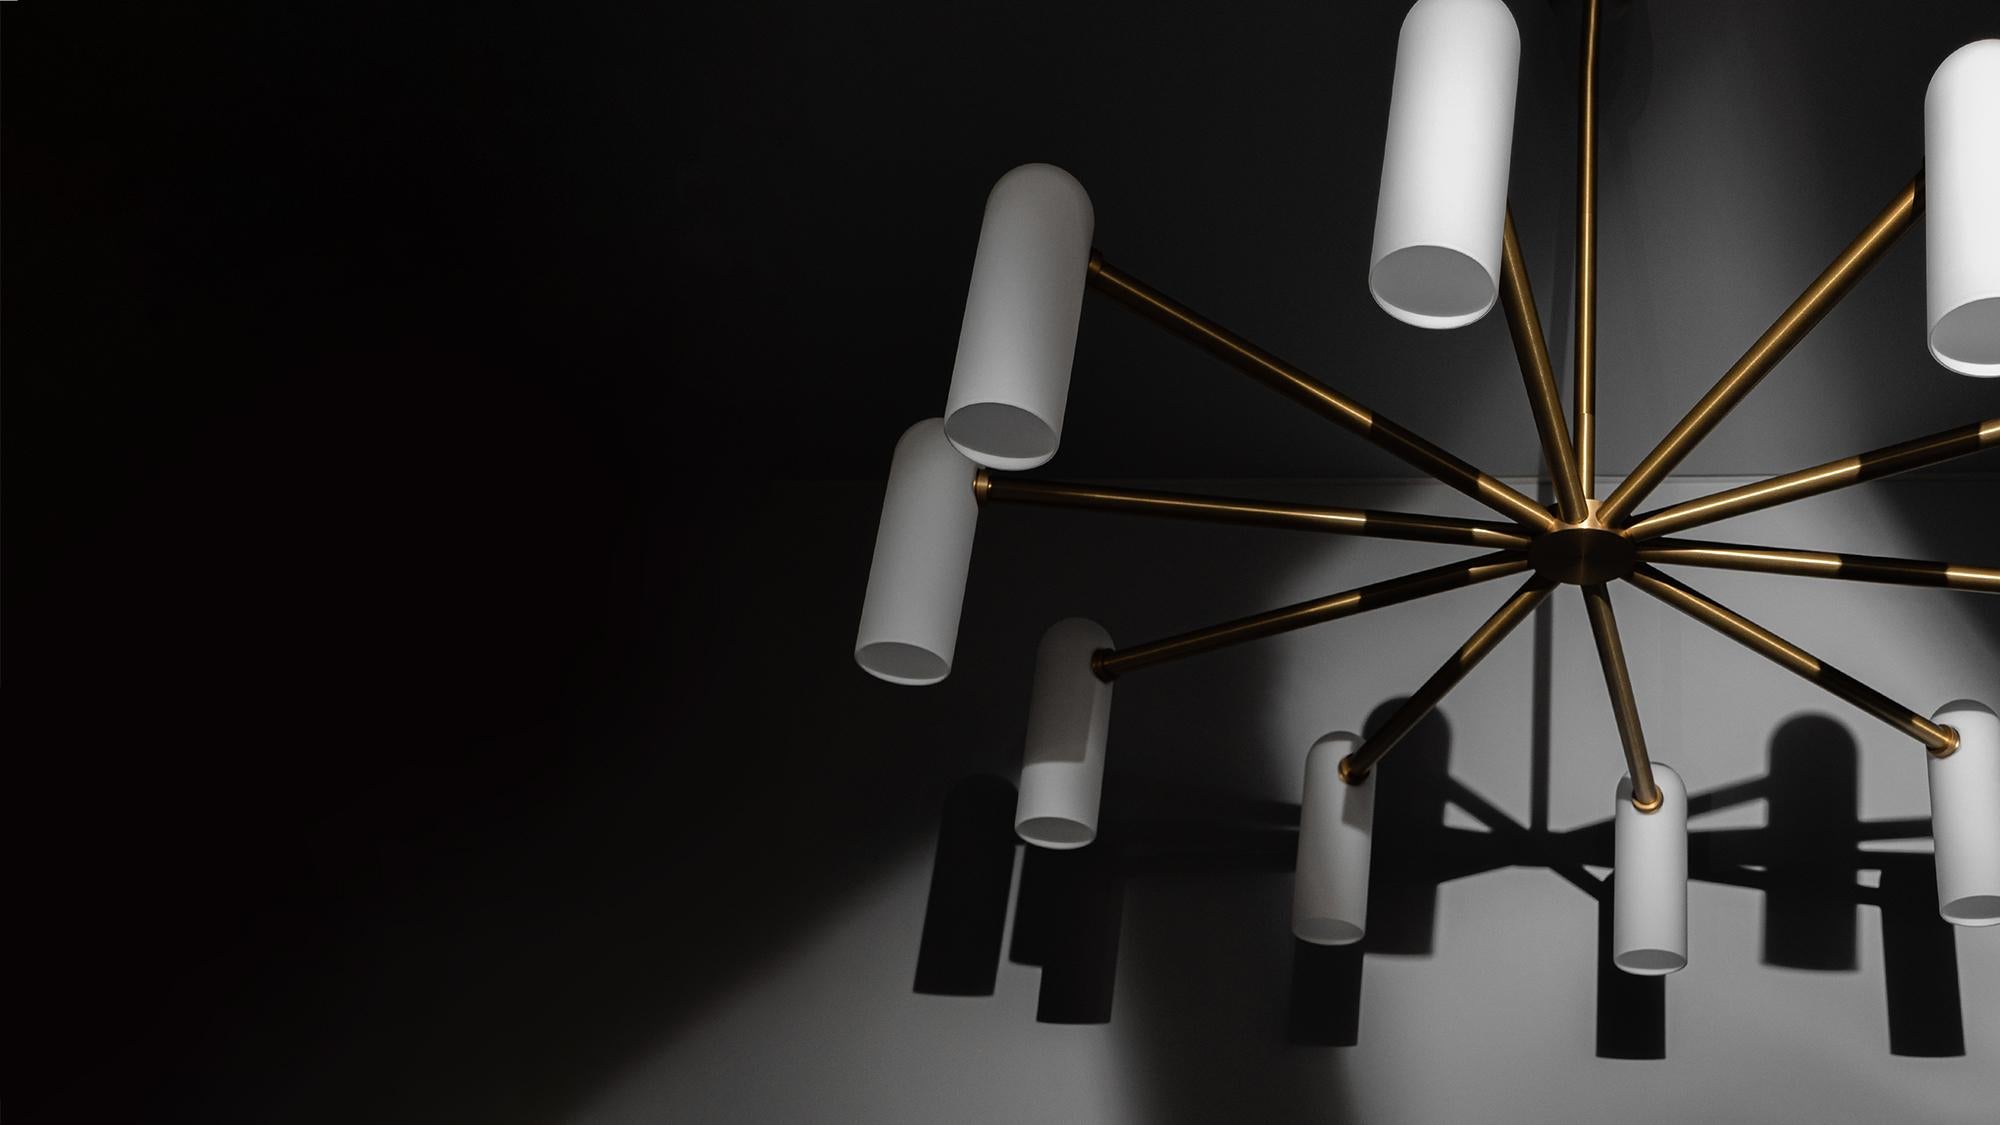 Spokes of brass hold slender lampshades, the circle of light creating a planetary effect in this striking round chandelier. Arched shapes drape downward while emanating an atmospheric twinkle.

Available in our three signature finishes: Lacquered